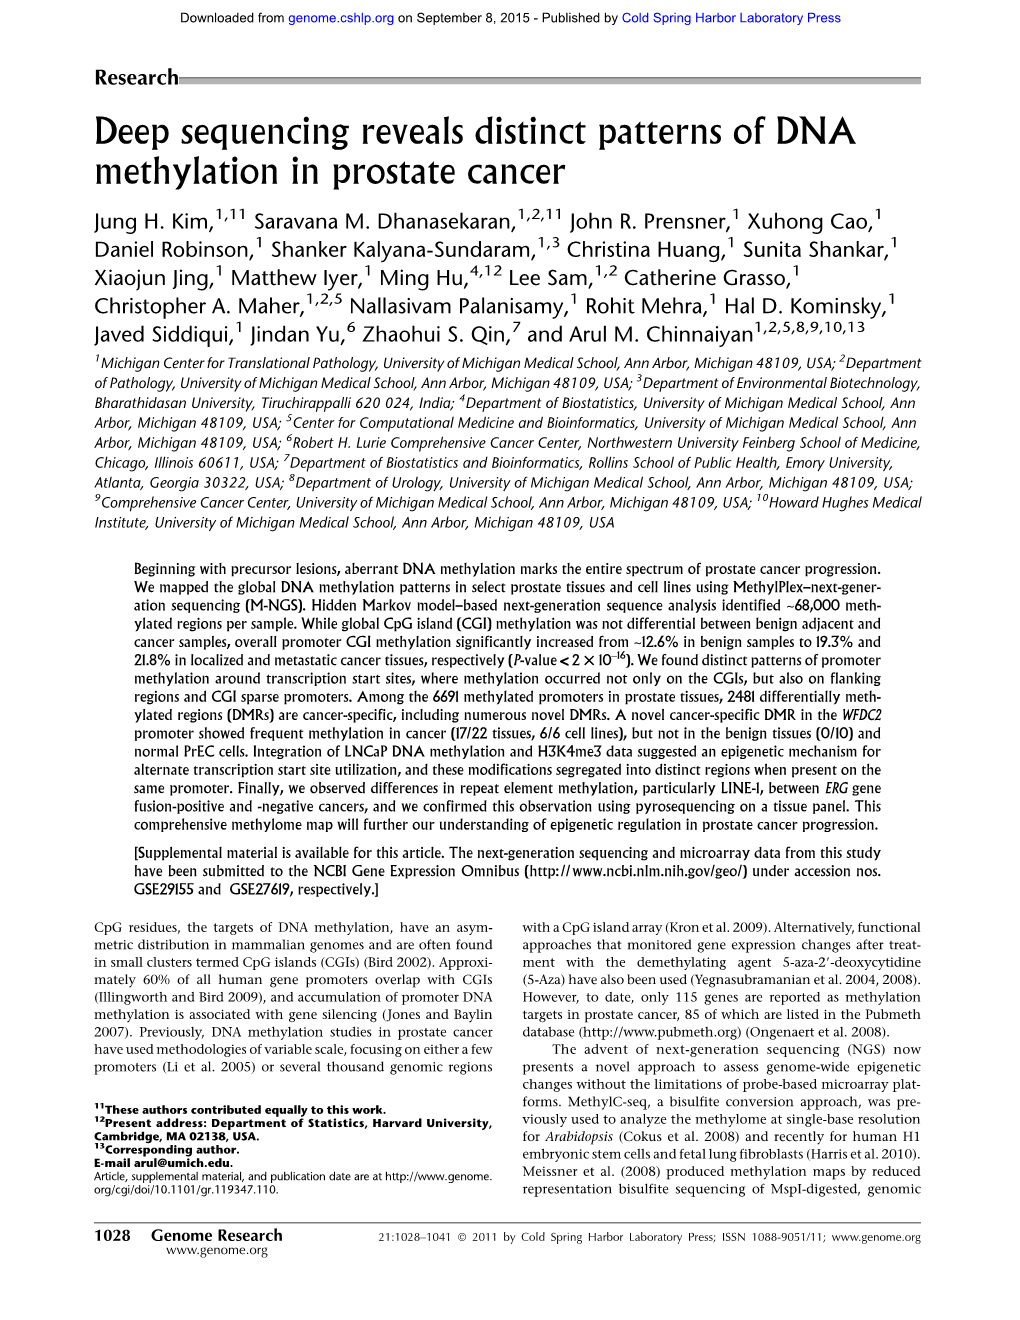 Deep Sequencing Reveals Distinct Patterns of DNA Methylation in Prostate Cancer